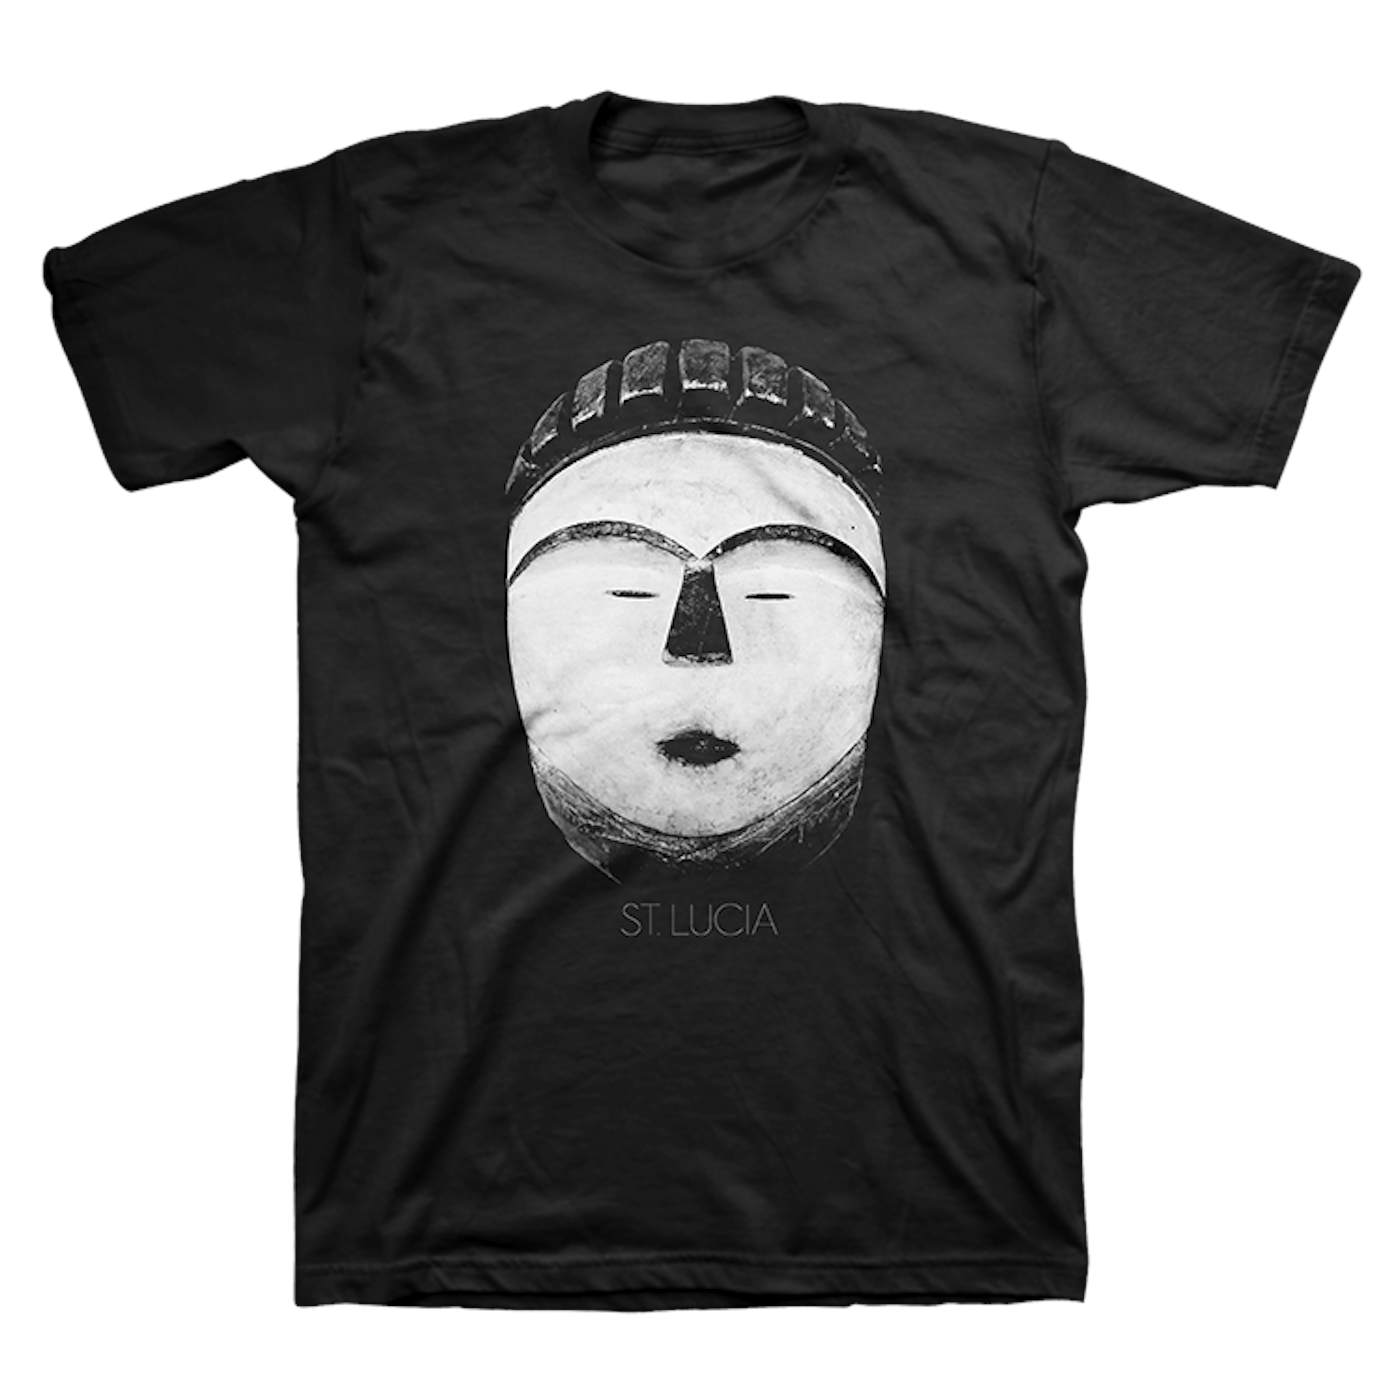 St. Lucia Mask Tee